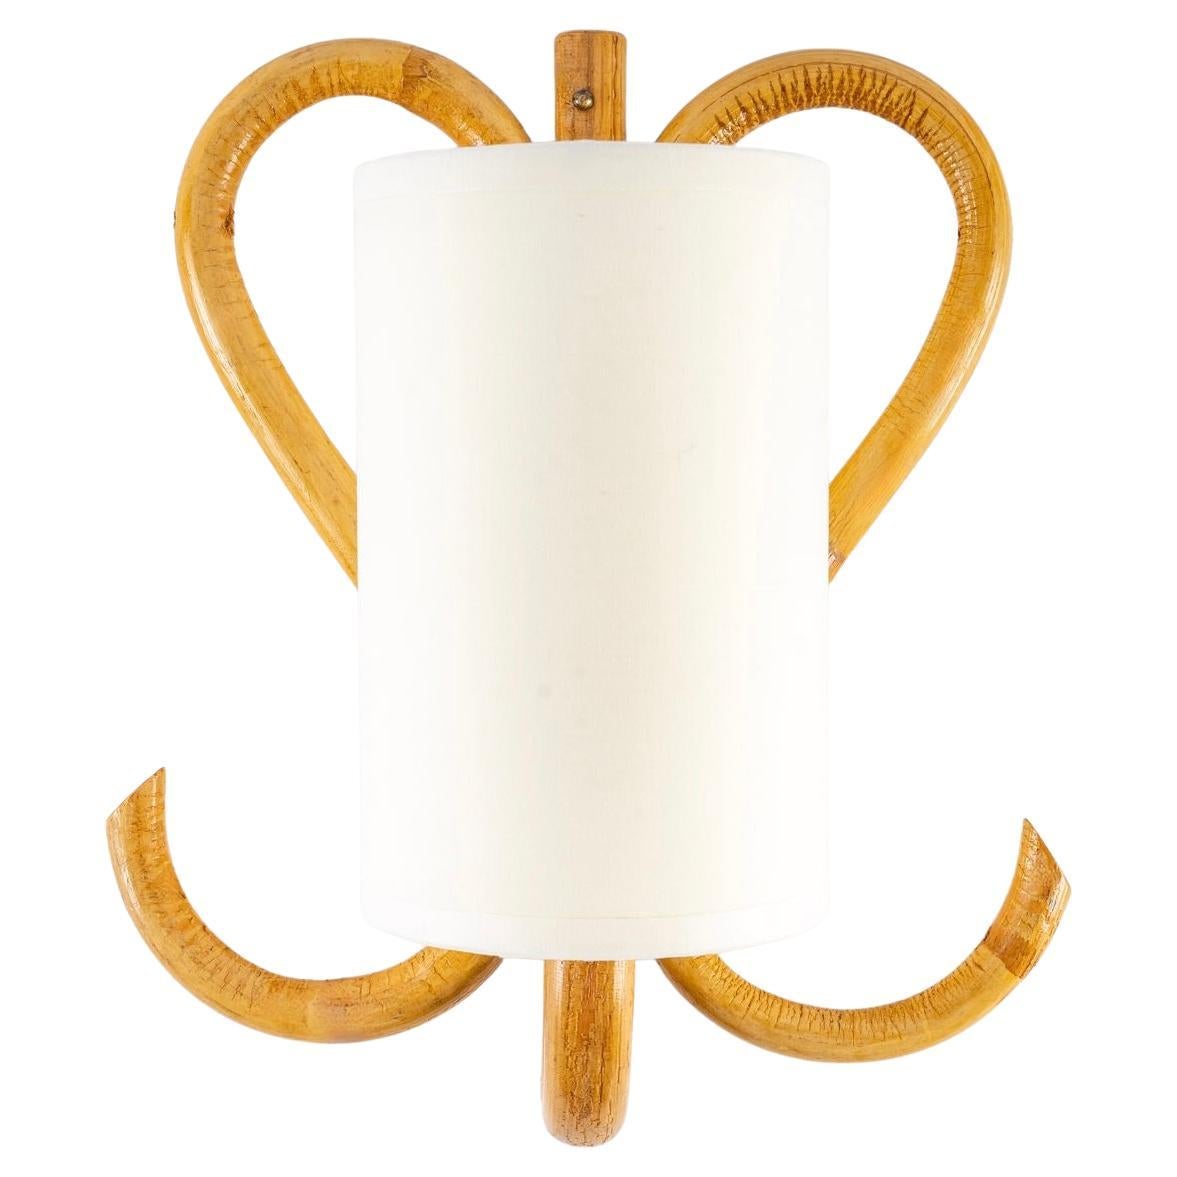 Composed of a central stem in electrified rattan going up on the low part, it is dressed with a cylindrical shade of off-white color redone identically.
On either side of the central stem, the wall lamp is decorated with two rattan stems forming a